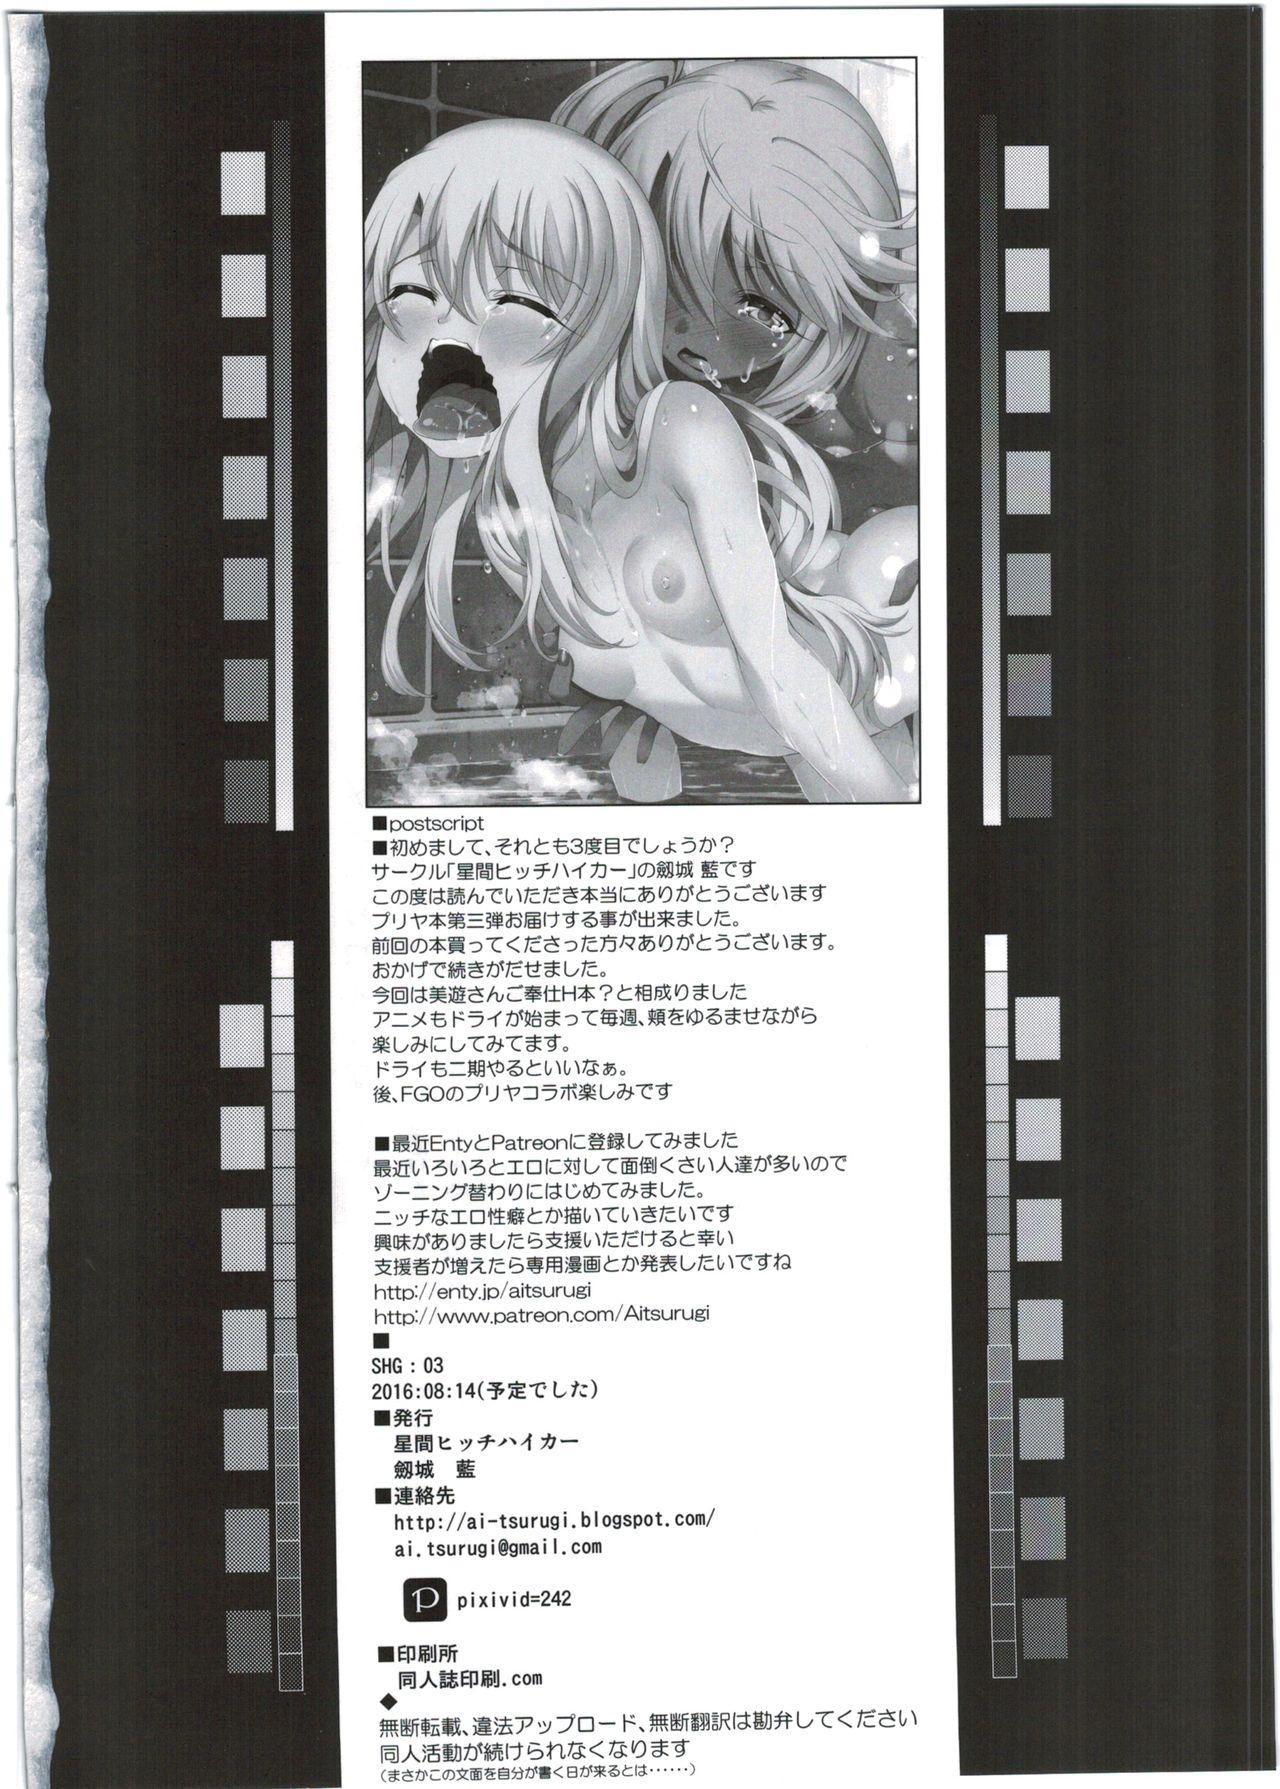 Ass Fucked SHG:03 - Fate kaleid liner prisma illya China - Page 26